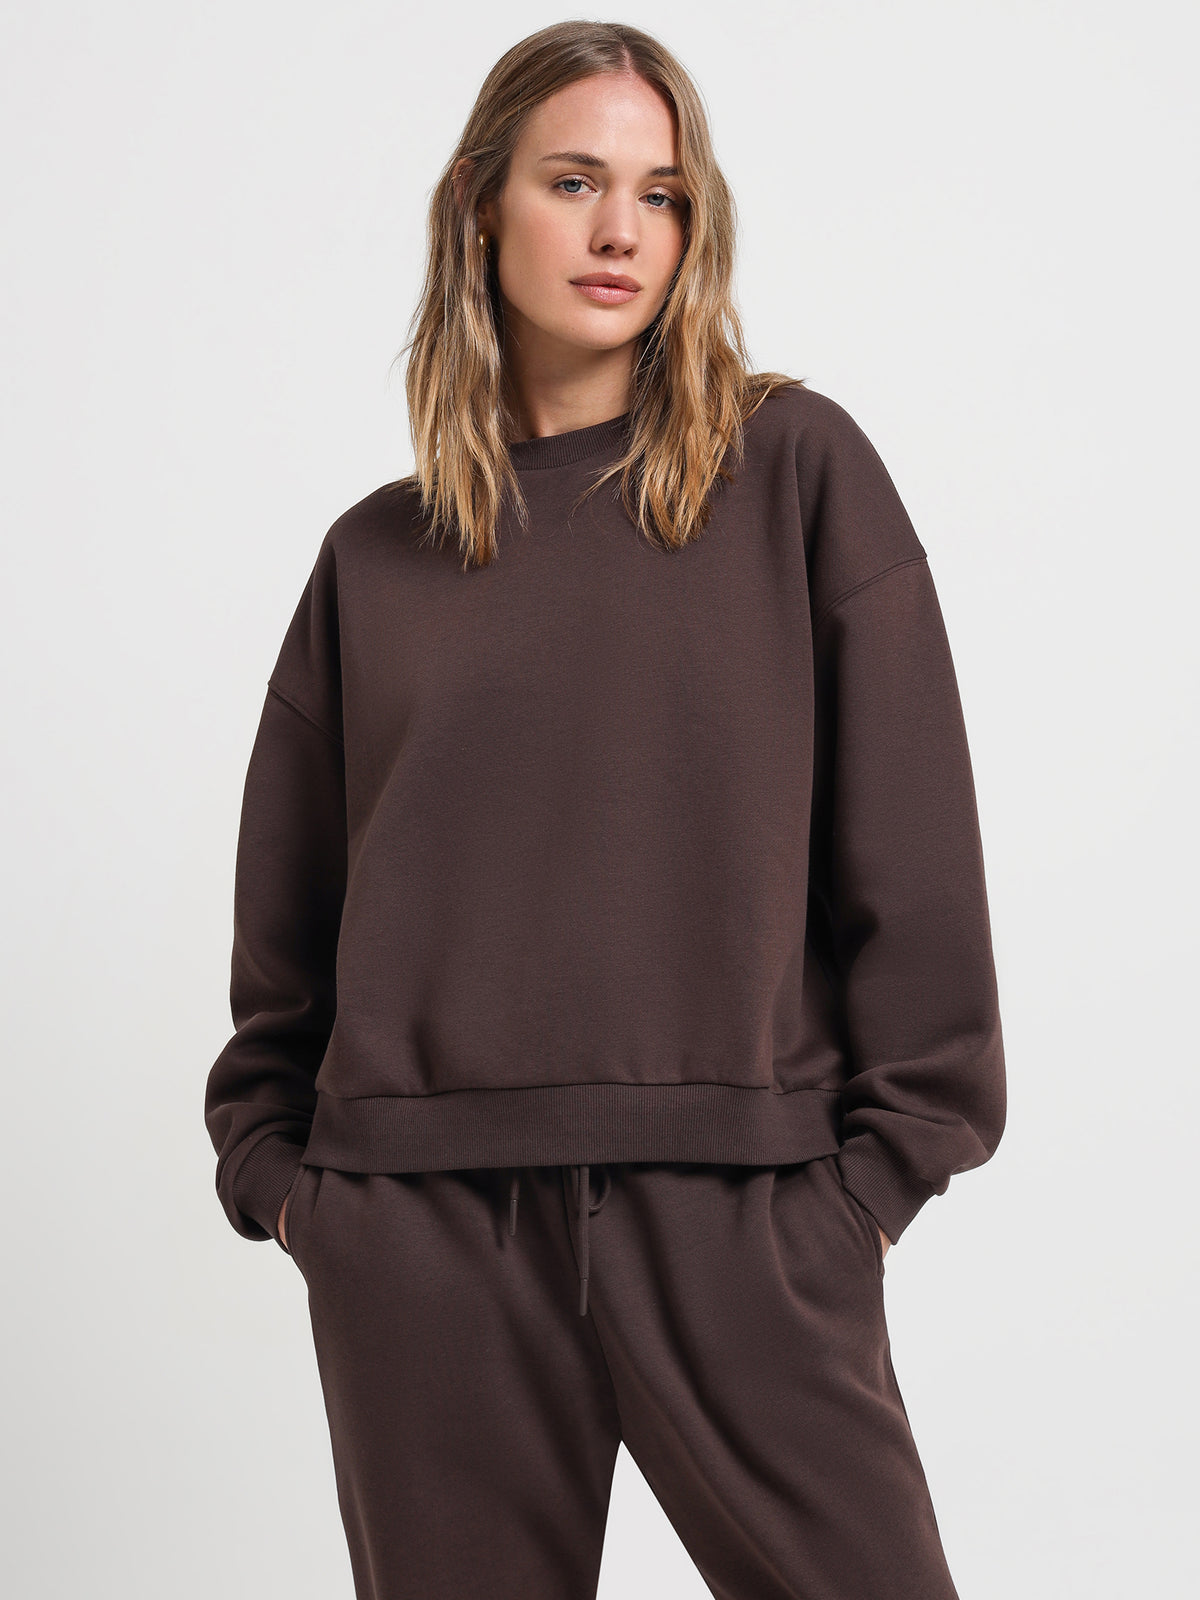 Carter Curated Sweater in Bark